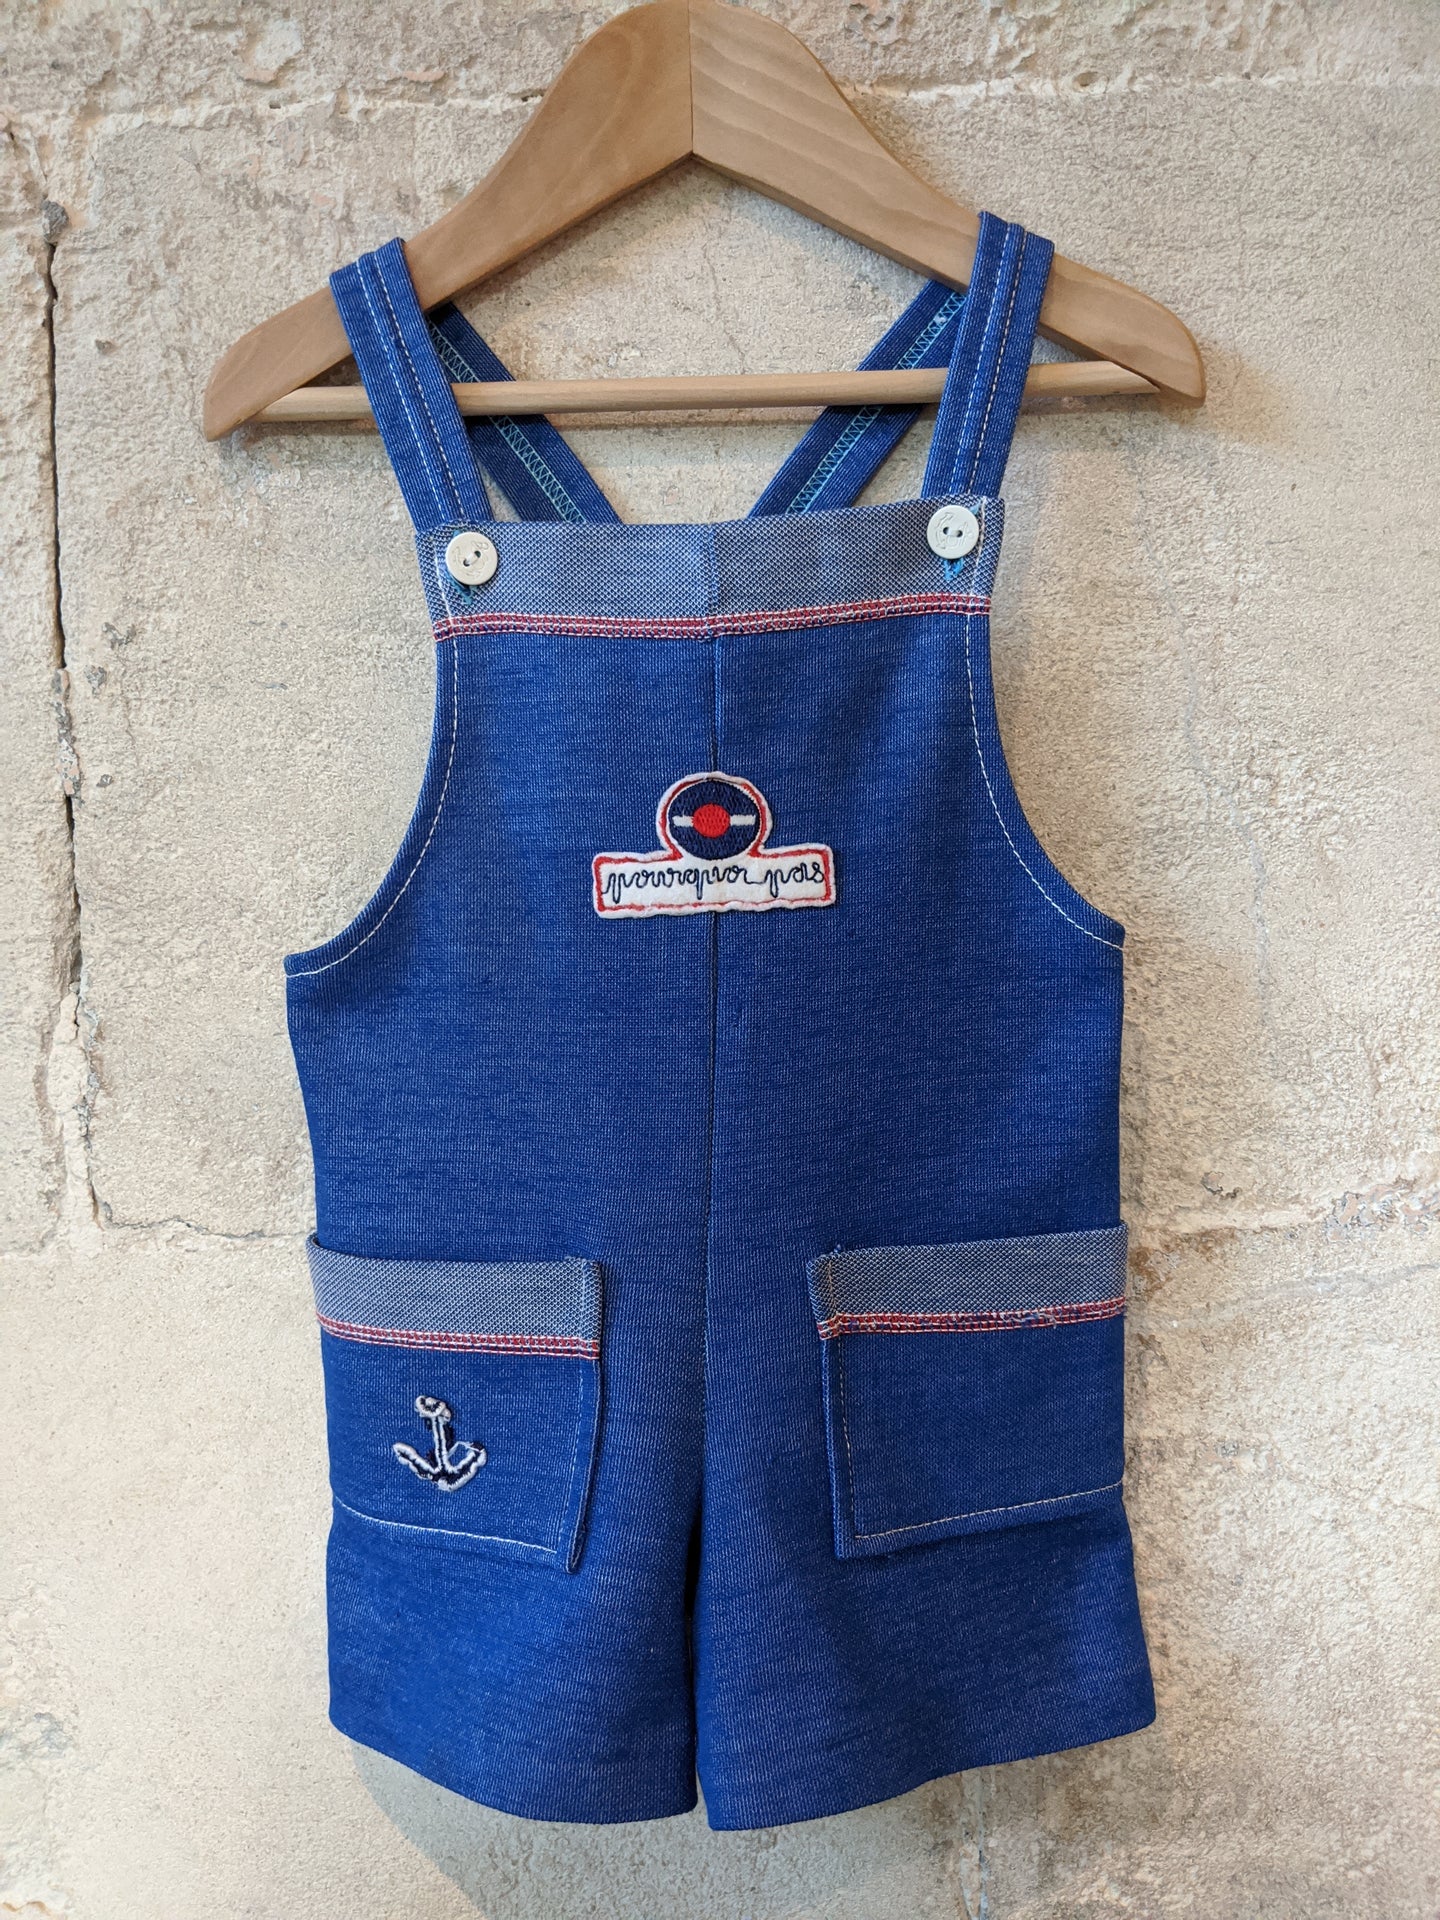 Amazing Vintage Dungarees - 6 Months